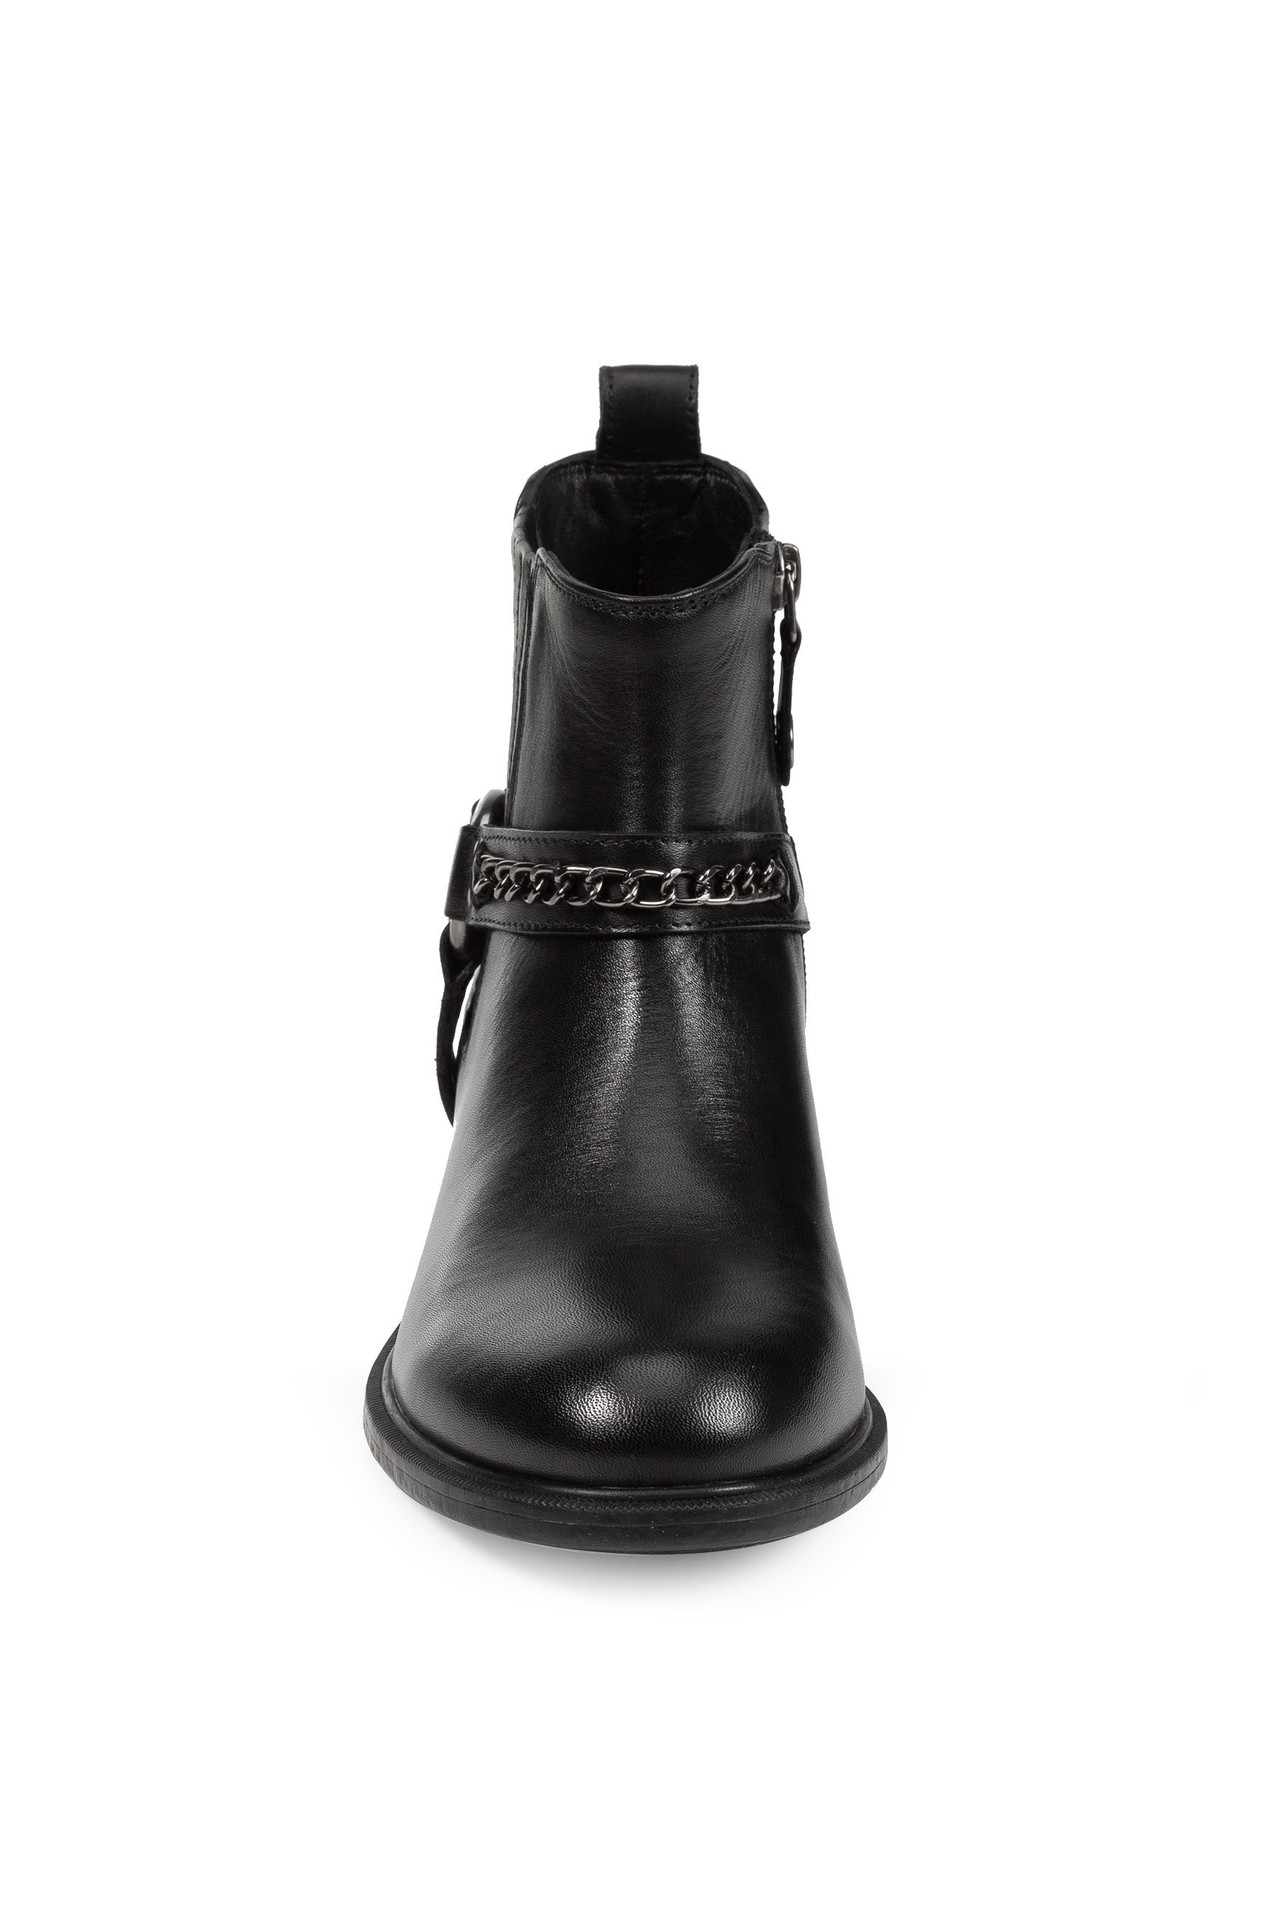 GEOX Catria - Black smooth leather